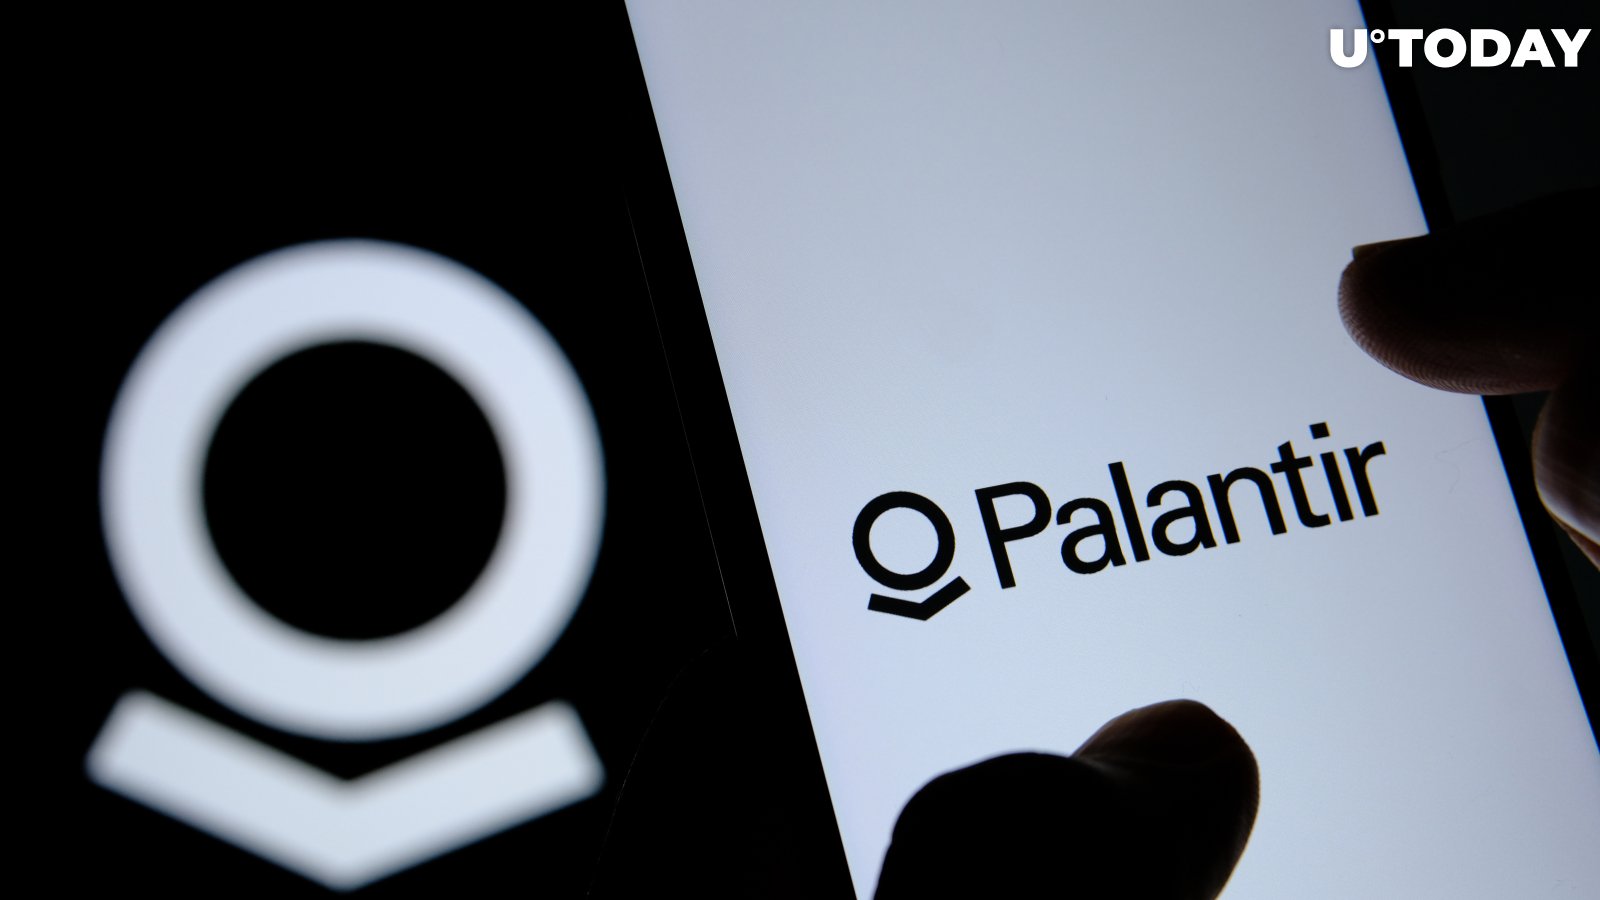 Data Analytics Giant Palantir Considering Adding Bitcoin to Its Balance Sheet, Starts Accepting BTC as Form of Payment